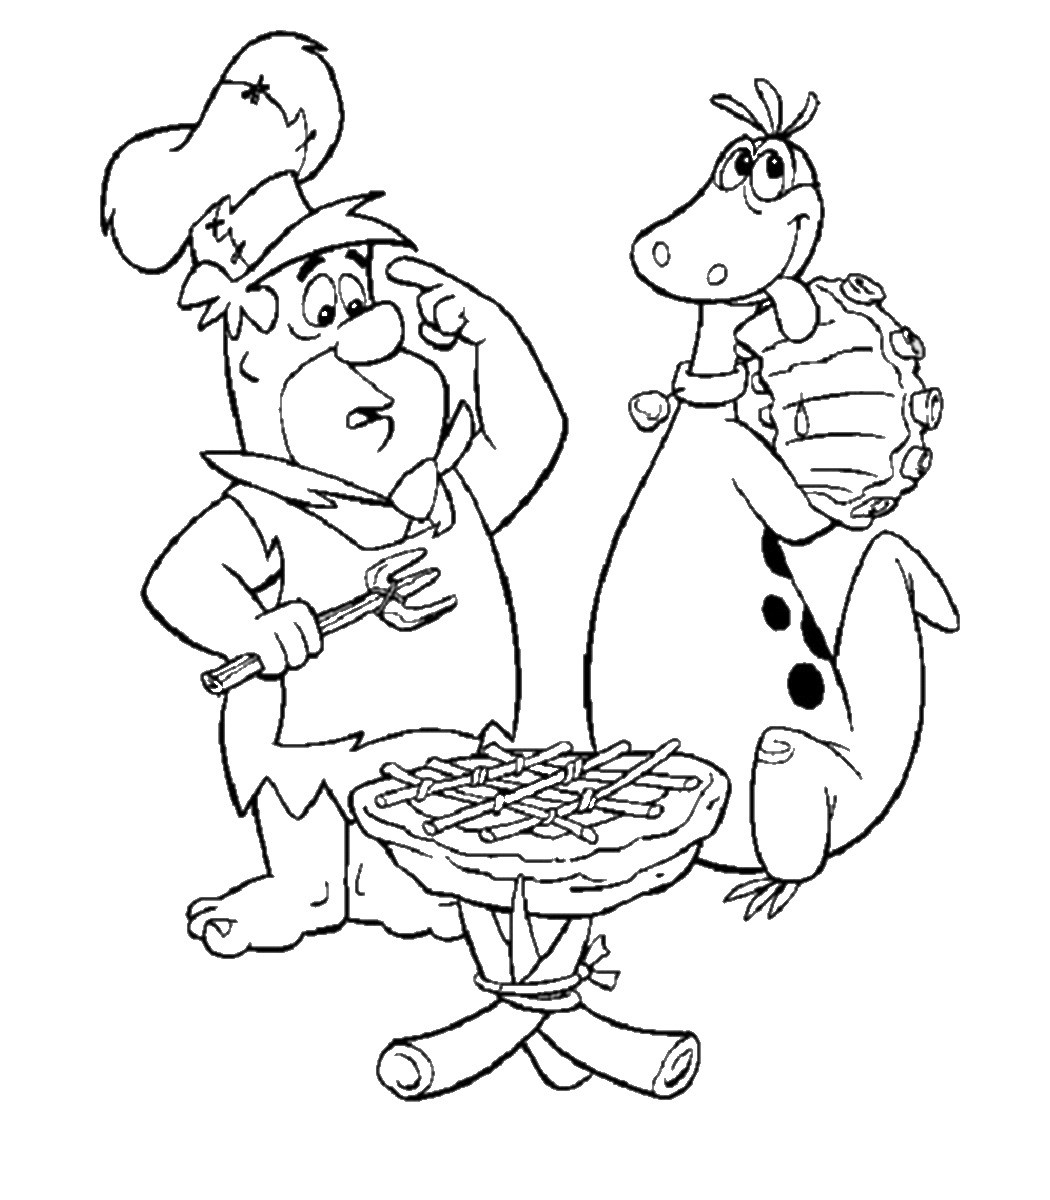 Coloring Pages Free Printable
 The Flintstones Coloring Pages